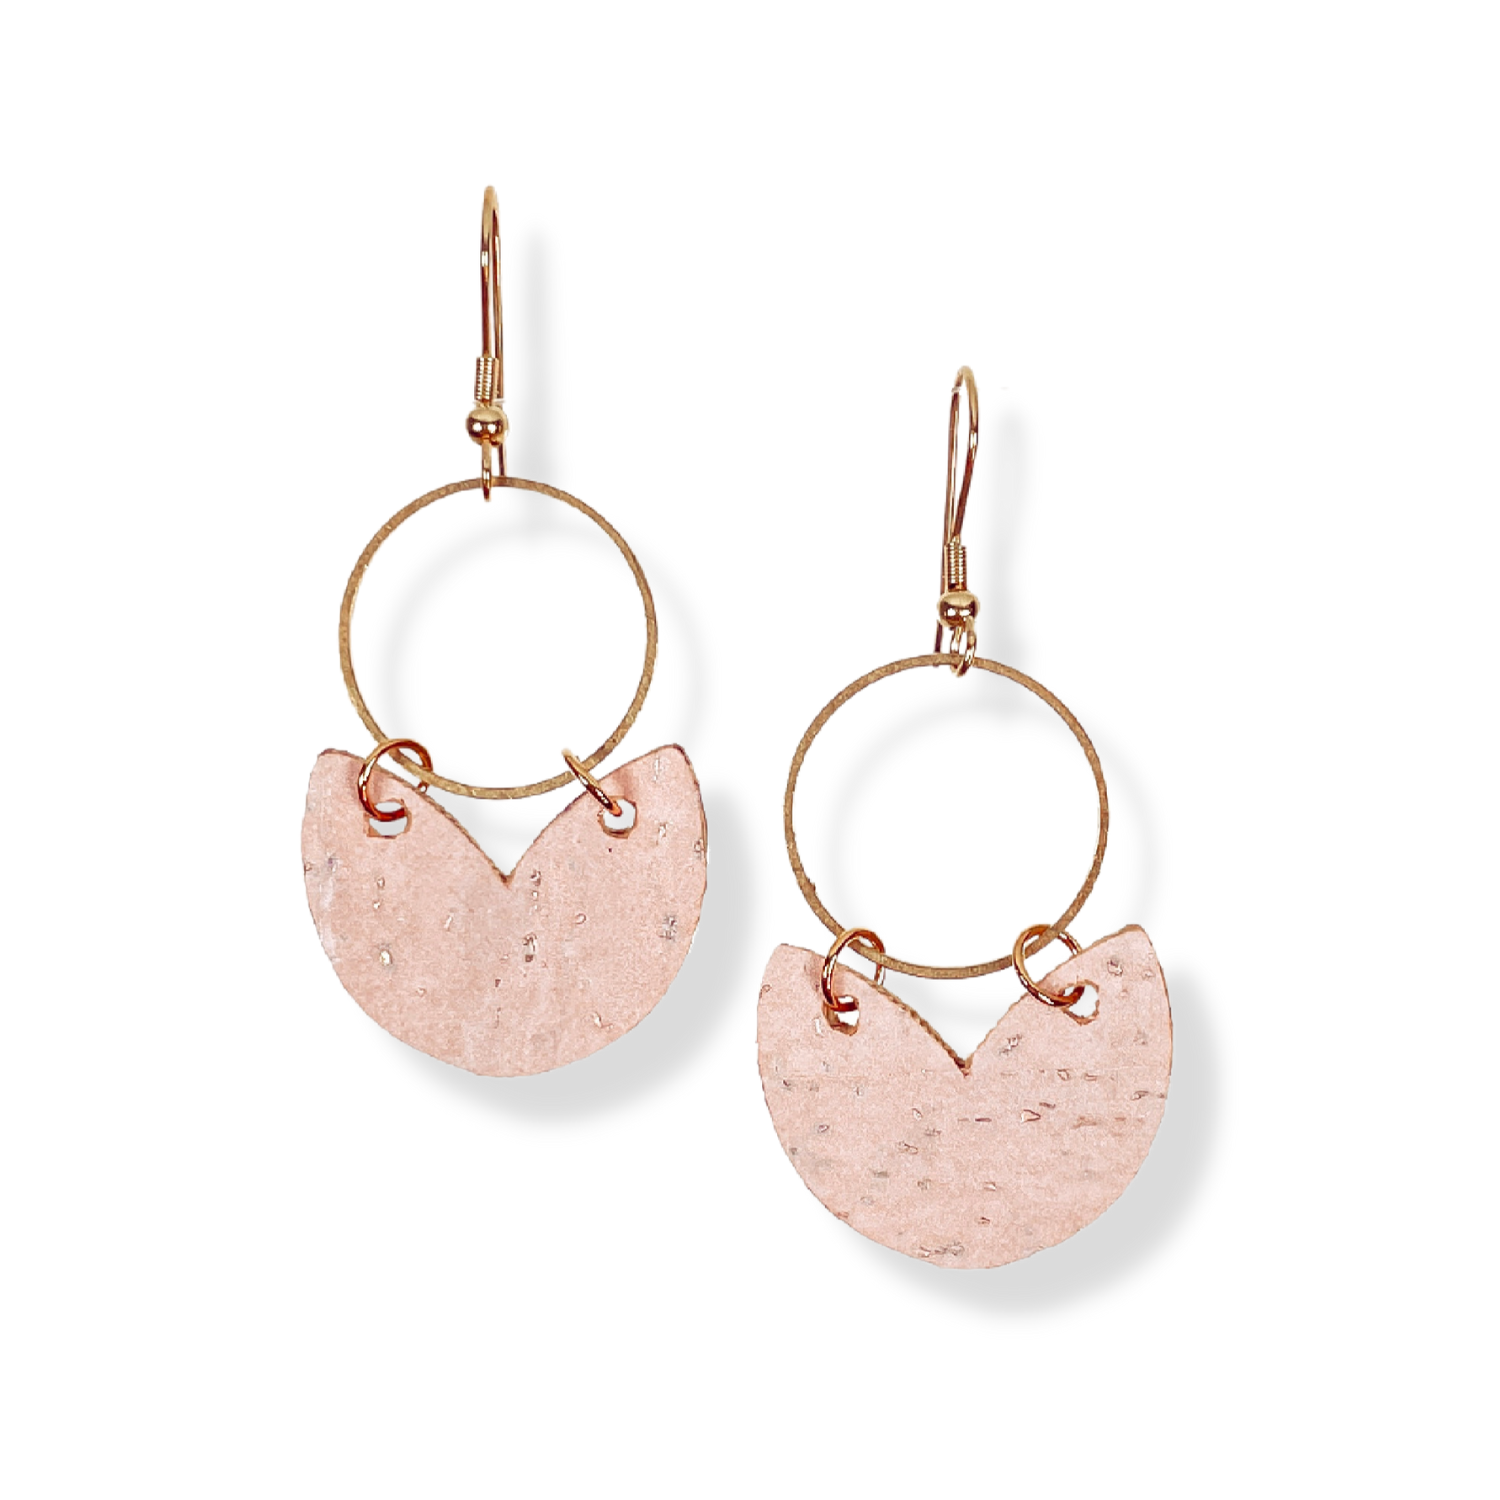 Amelia Cork and Gold Accent Dangly Earrings-Blush